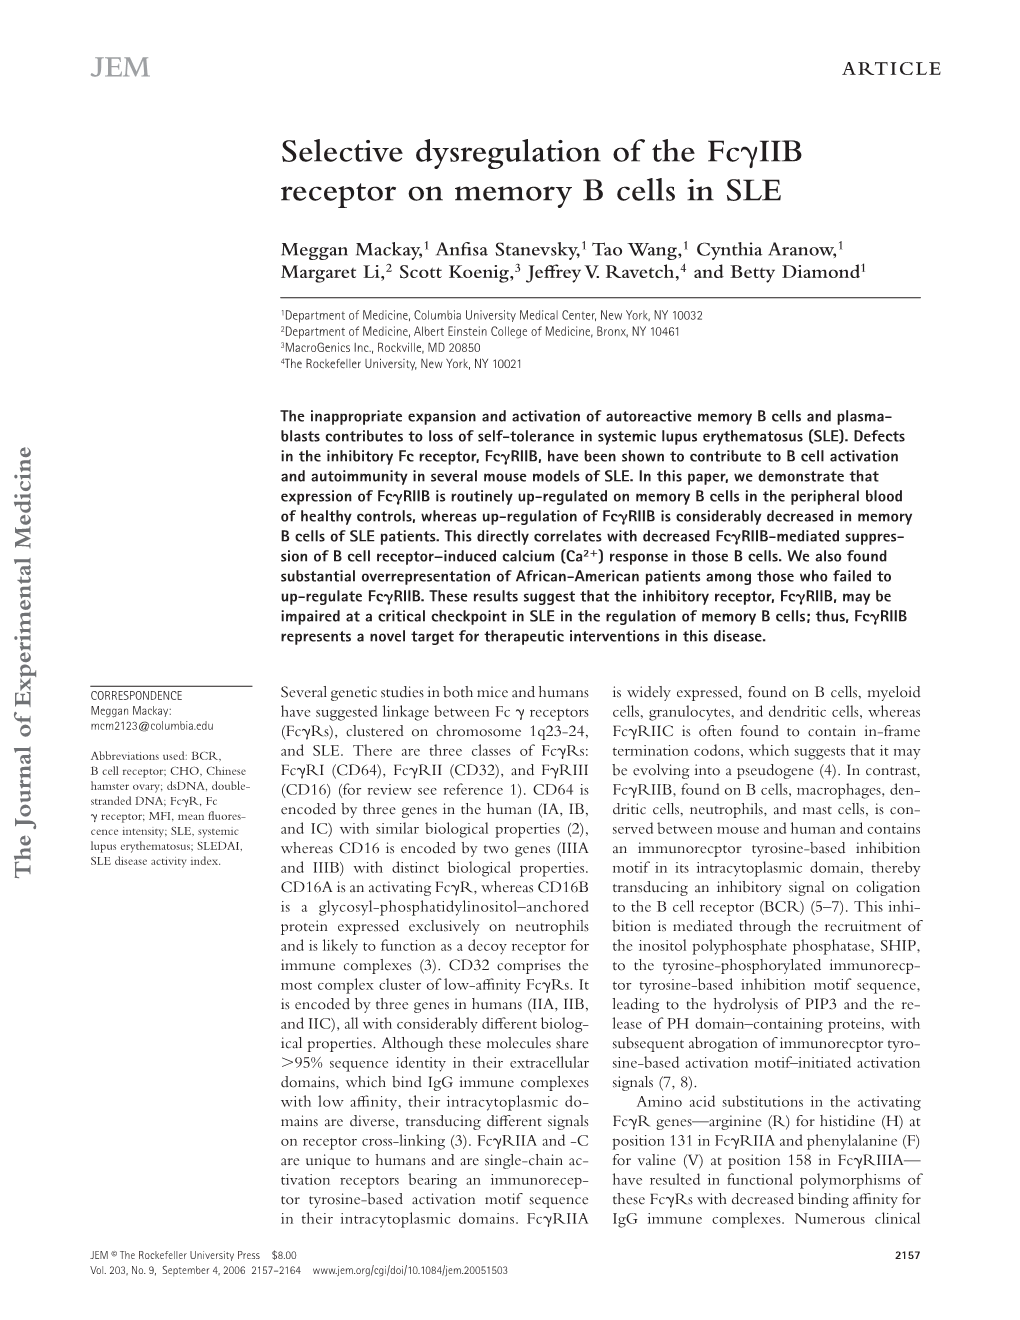 Selective Dysregulation of the Fcγiib Receptor on Memory B Cells In